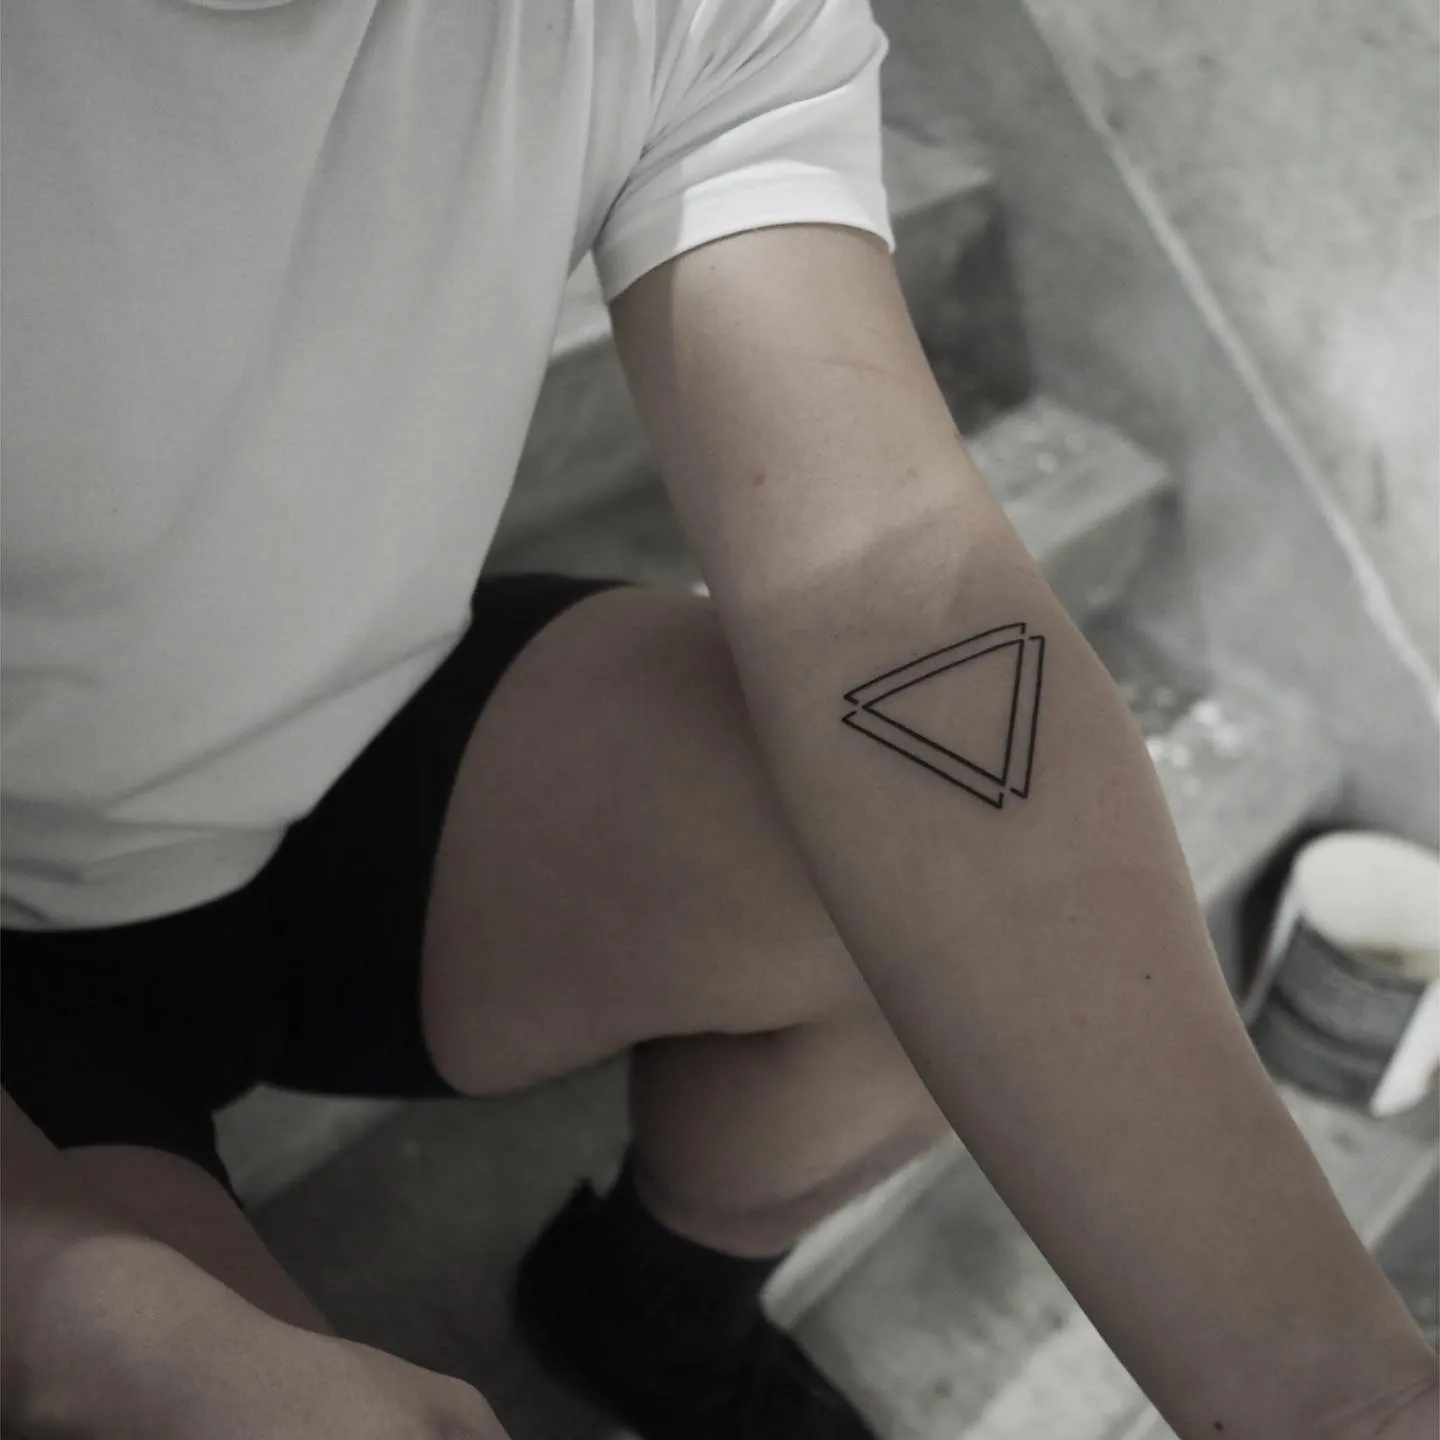 Outline of Double Triangles on the Arm